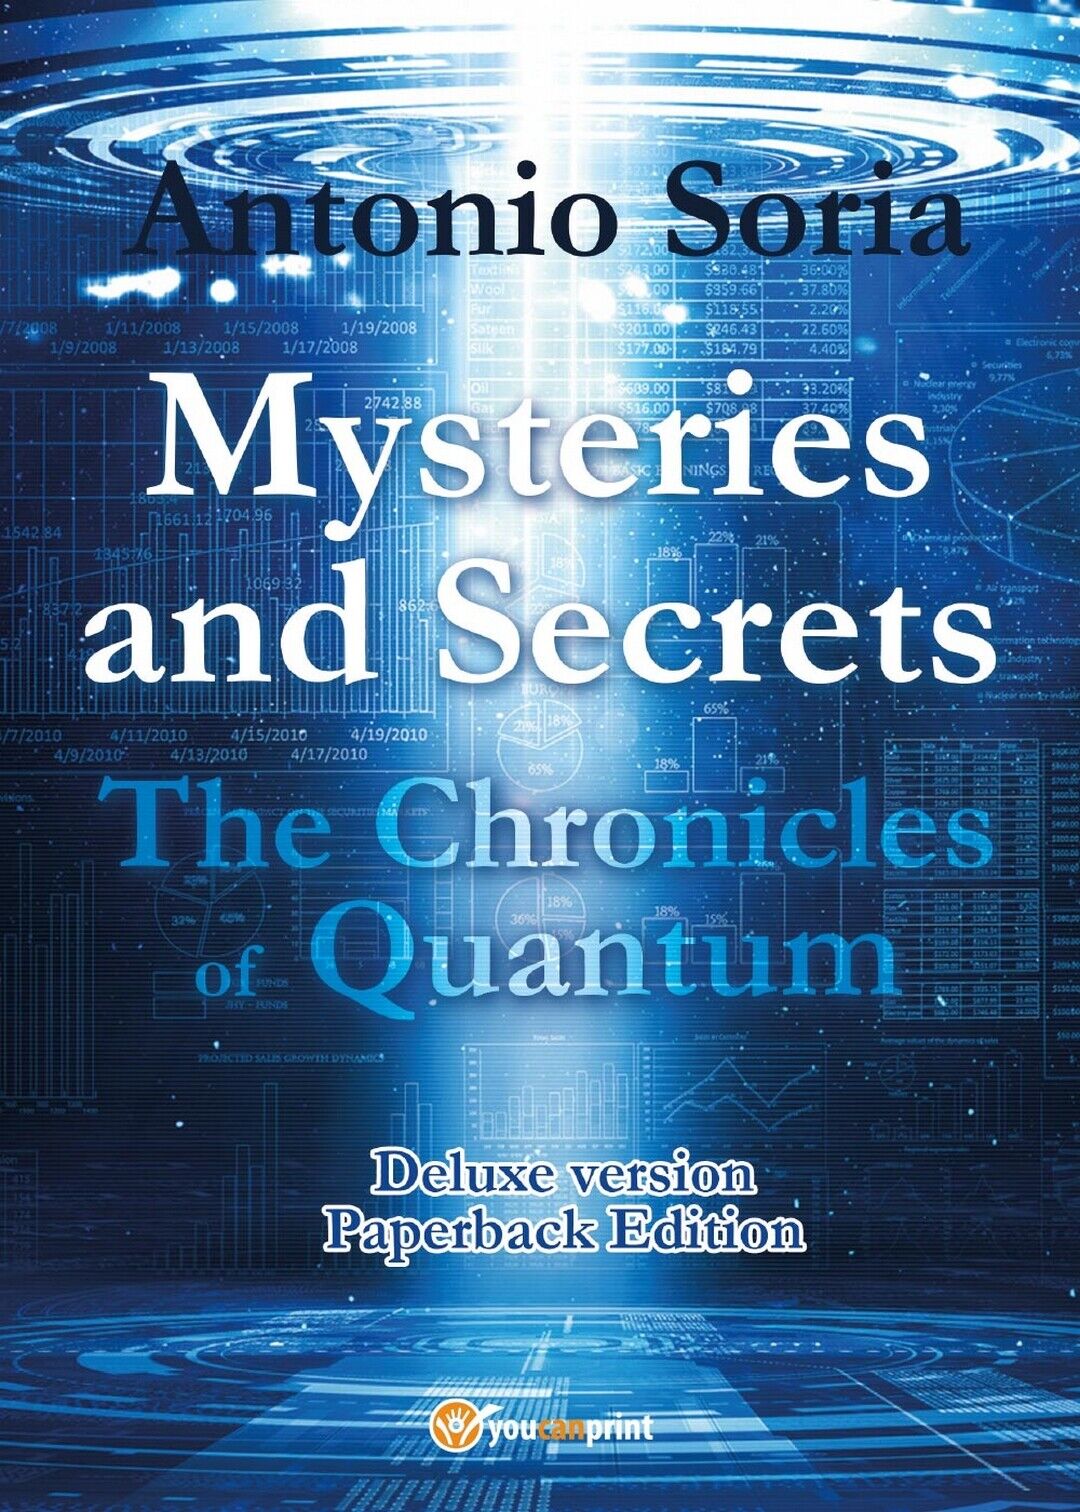 Mysteries and Secrets. The Chronicles of Quantum (Deluxe version) Paperback Edit libro usato